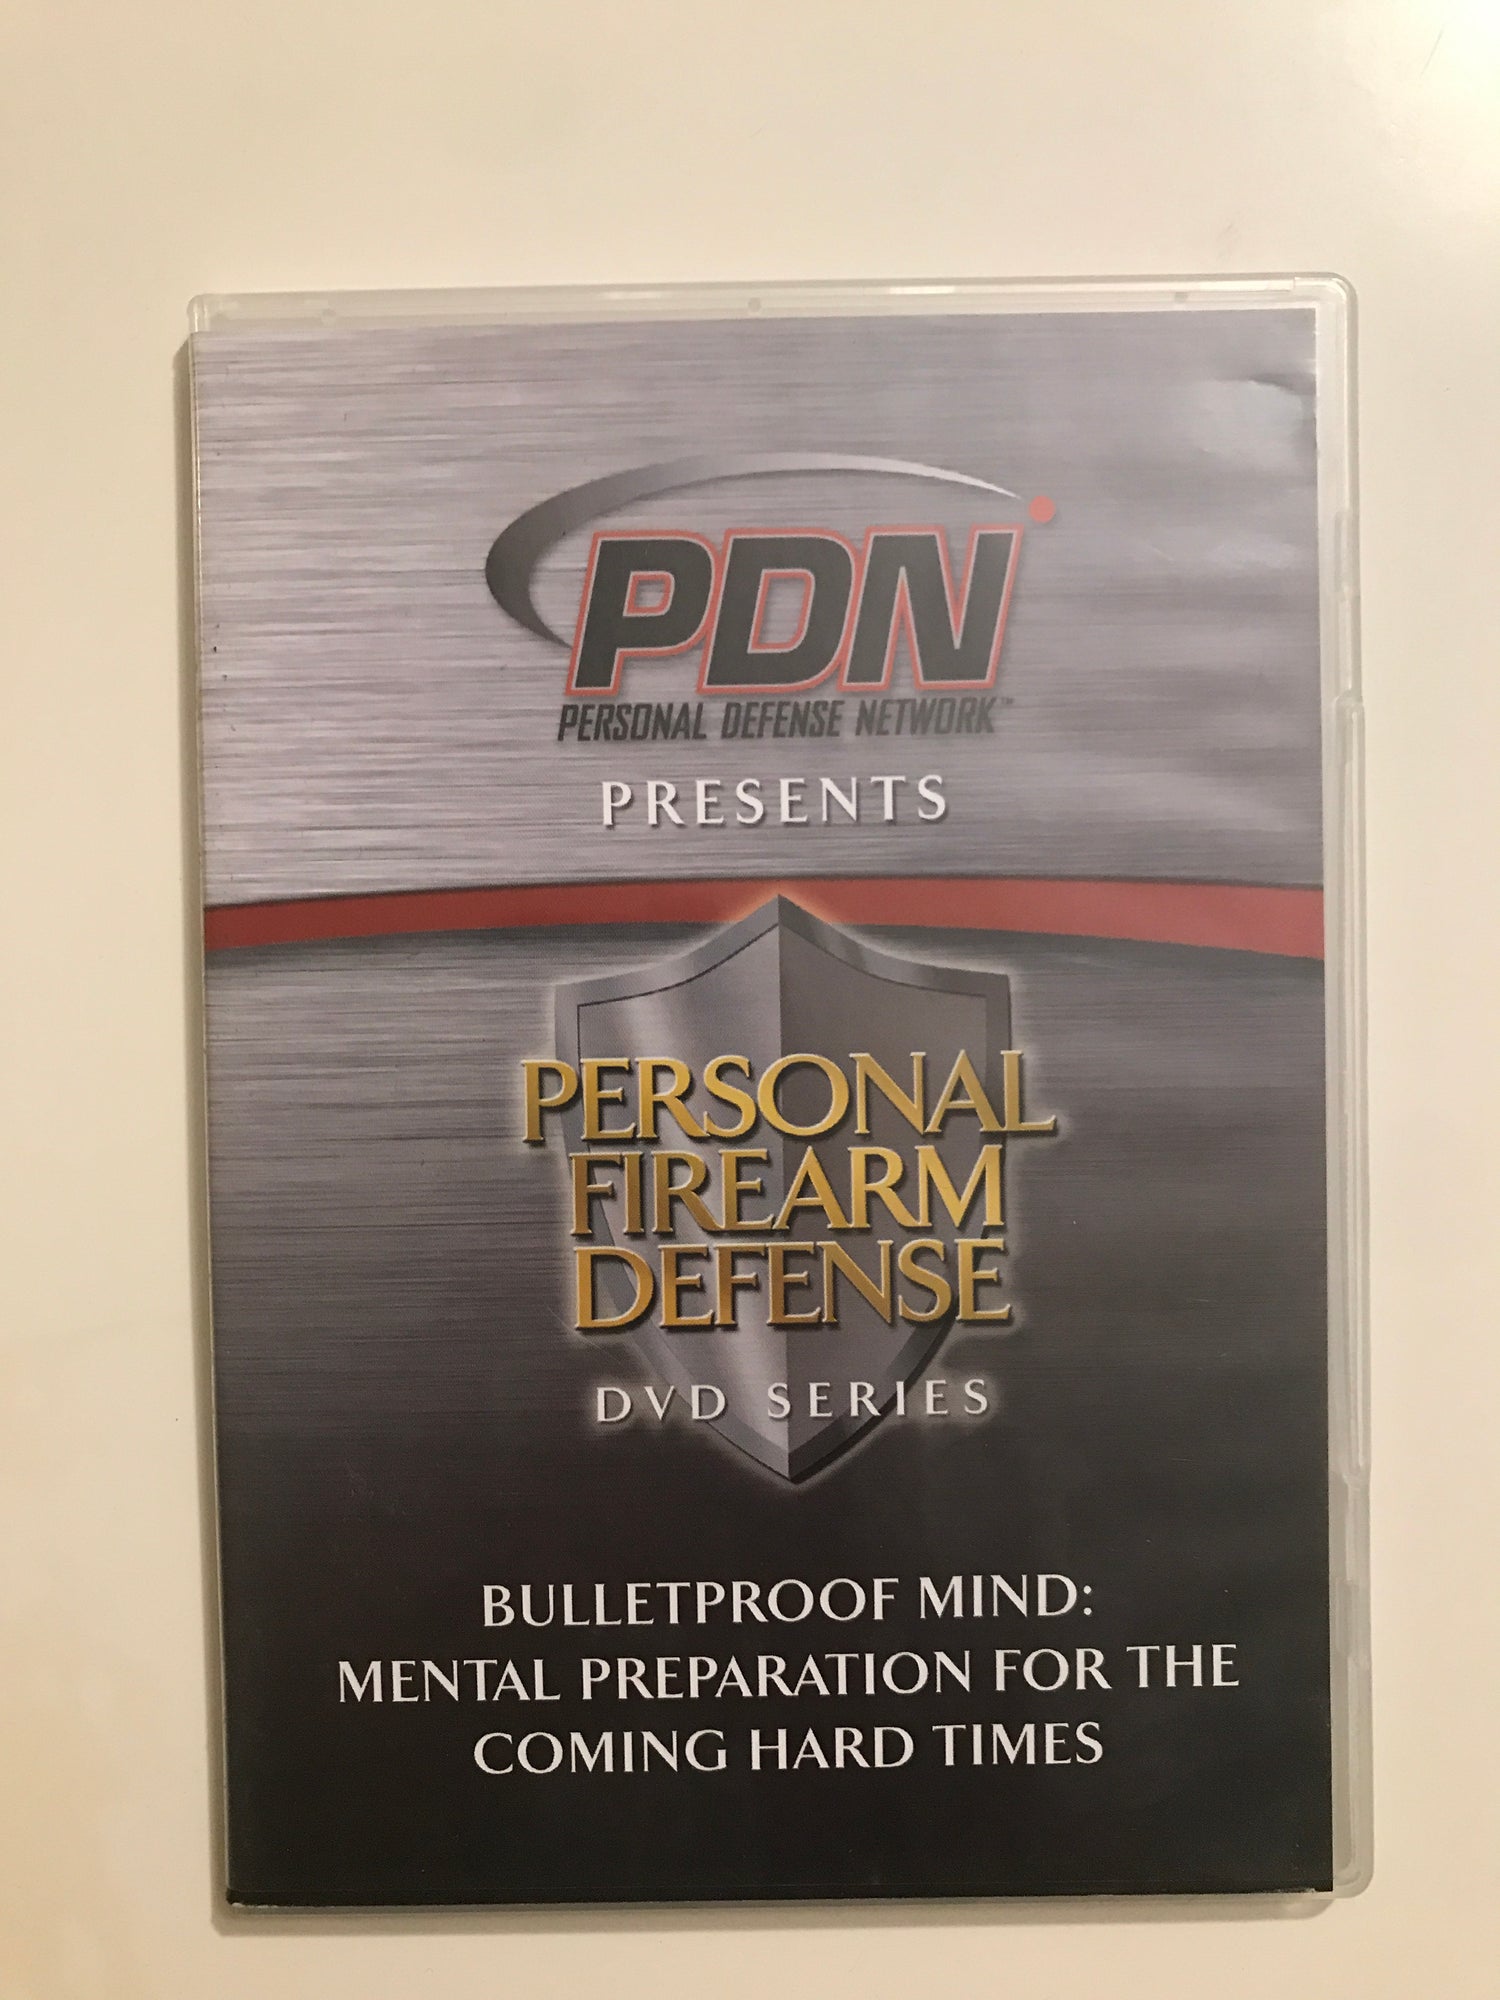 Personal Firearm Defense: Bulletproof Mind: Mental Preparation for the Coming Hard Times DVD by Rob Pincus (Preowned) - Budovideos